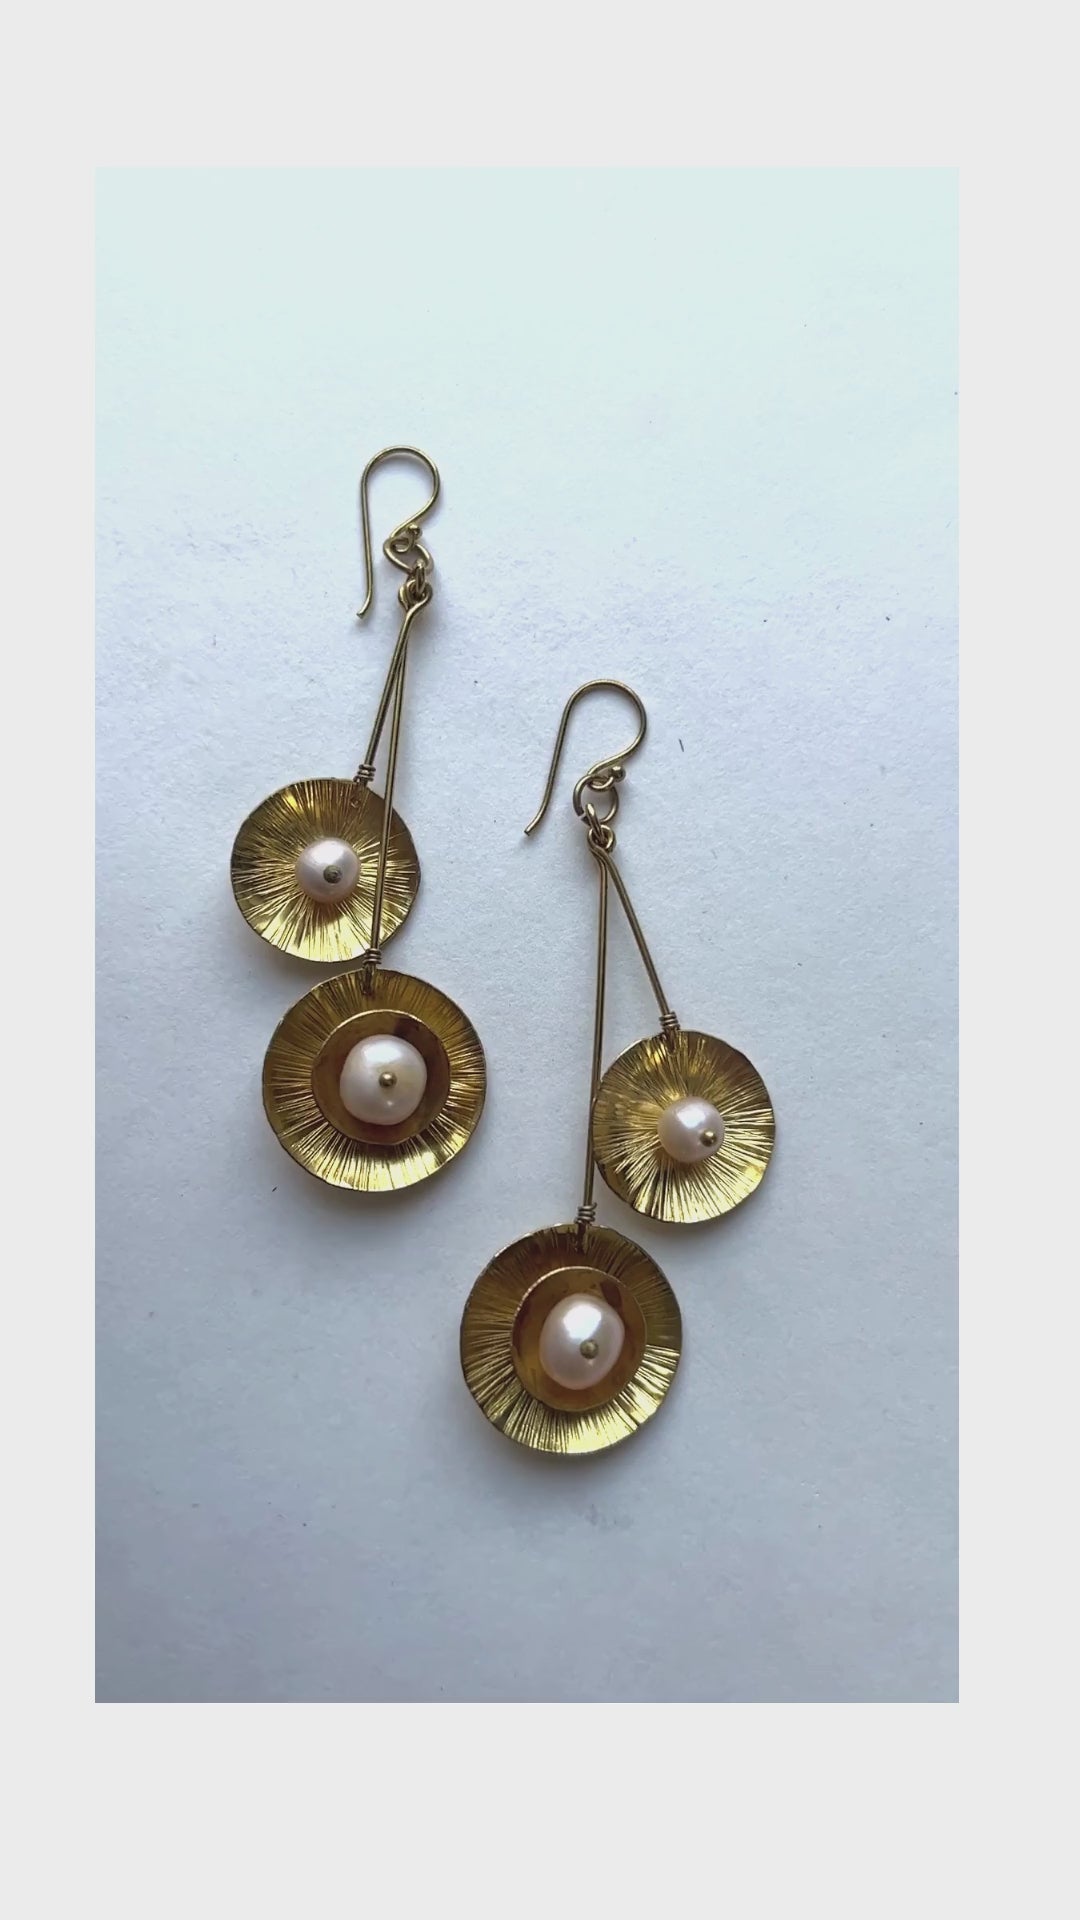 These dangling earrings have a unique design with a double drop with a round organic shape suspended at the bottom containing a pearl in the middle.